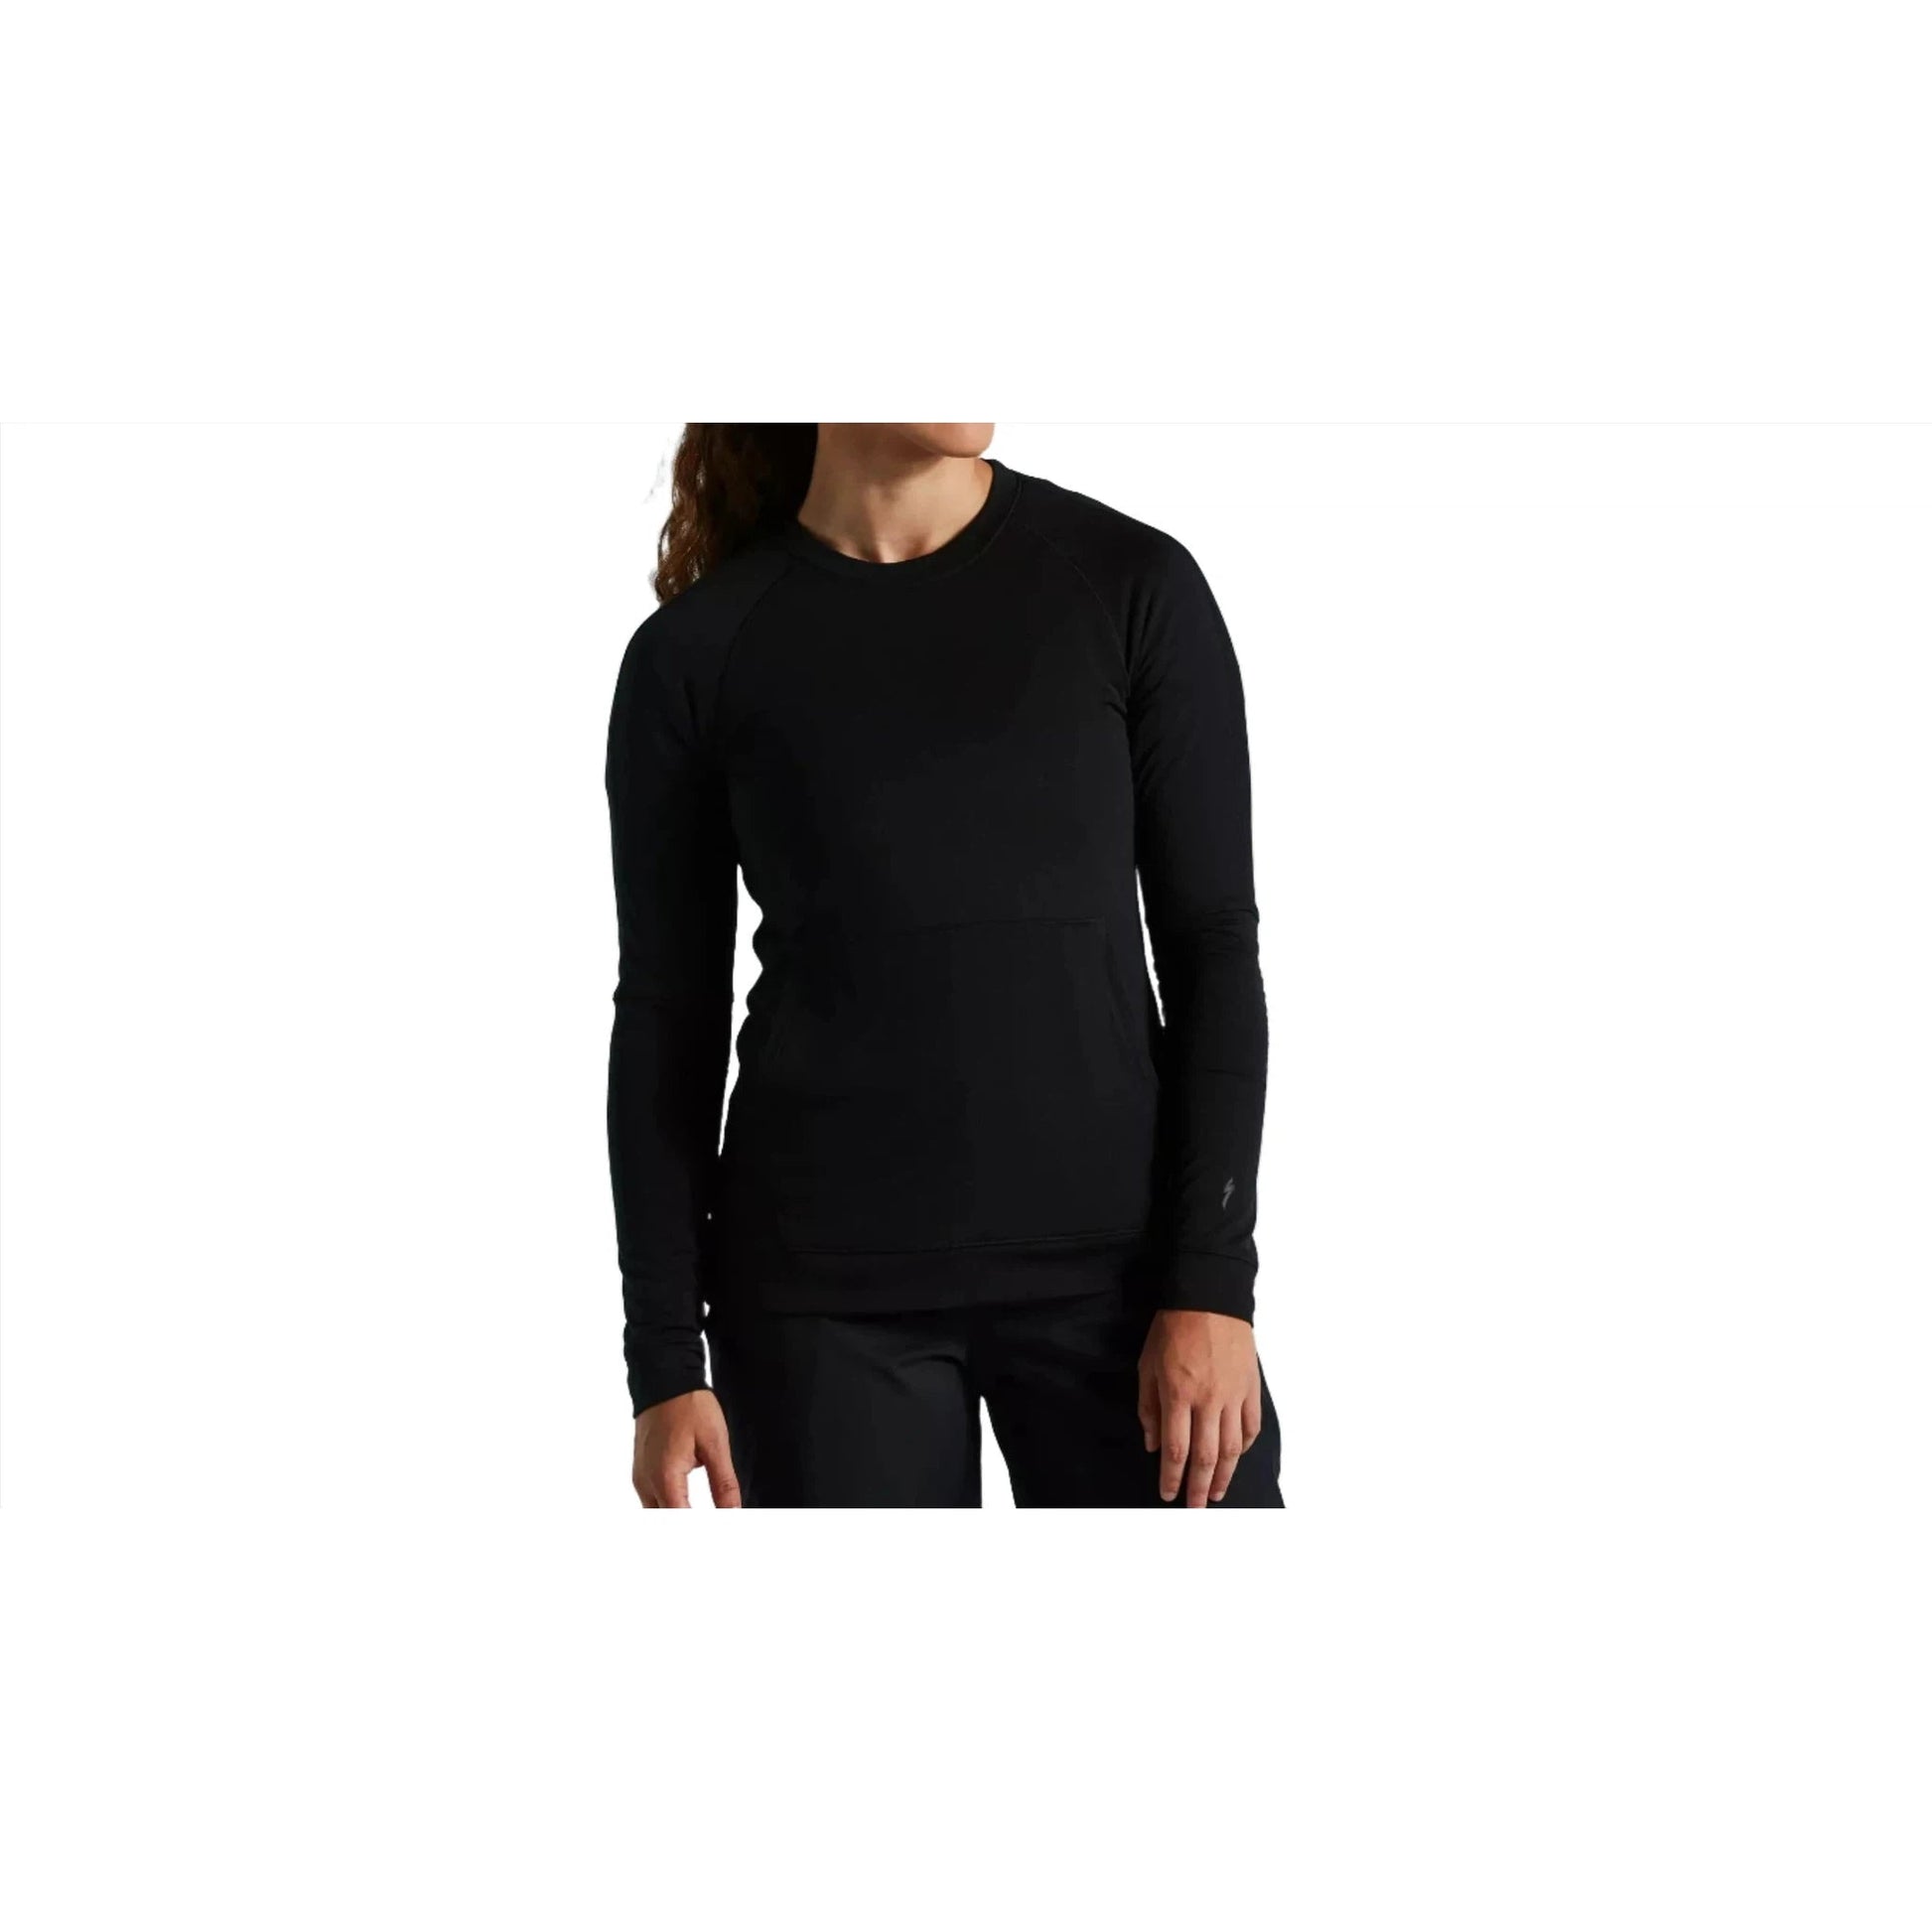 Women's Trail Thermal Jersey | Complete Cyclist - The new Trail Thermal Jersey utilizes Polartec¨ Power Gridª fabric to keep you warm and comfy, all while being exceptionally breathable. It's the perfect option